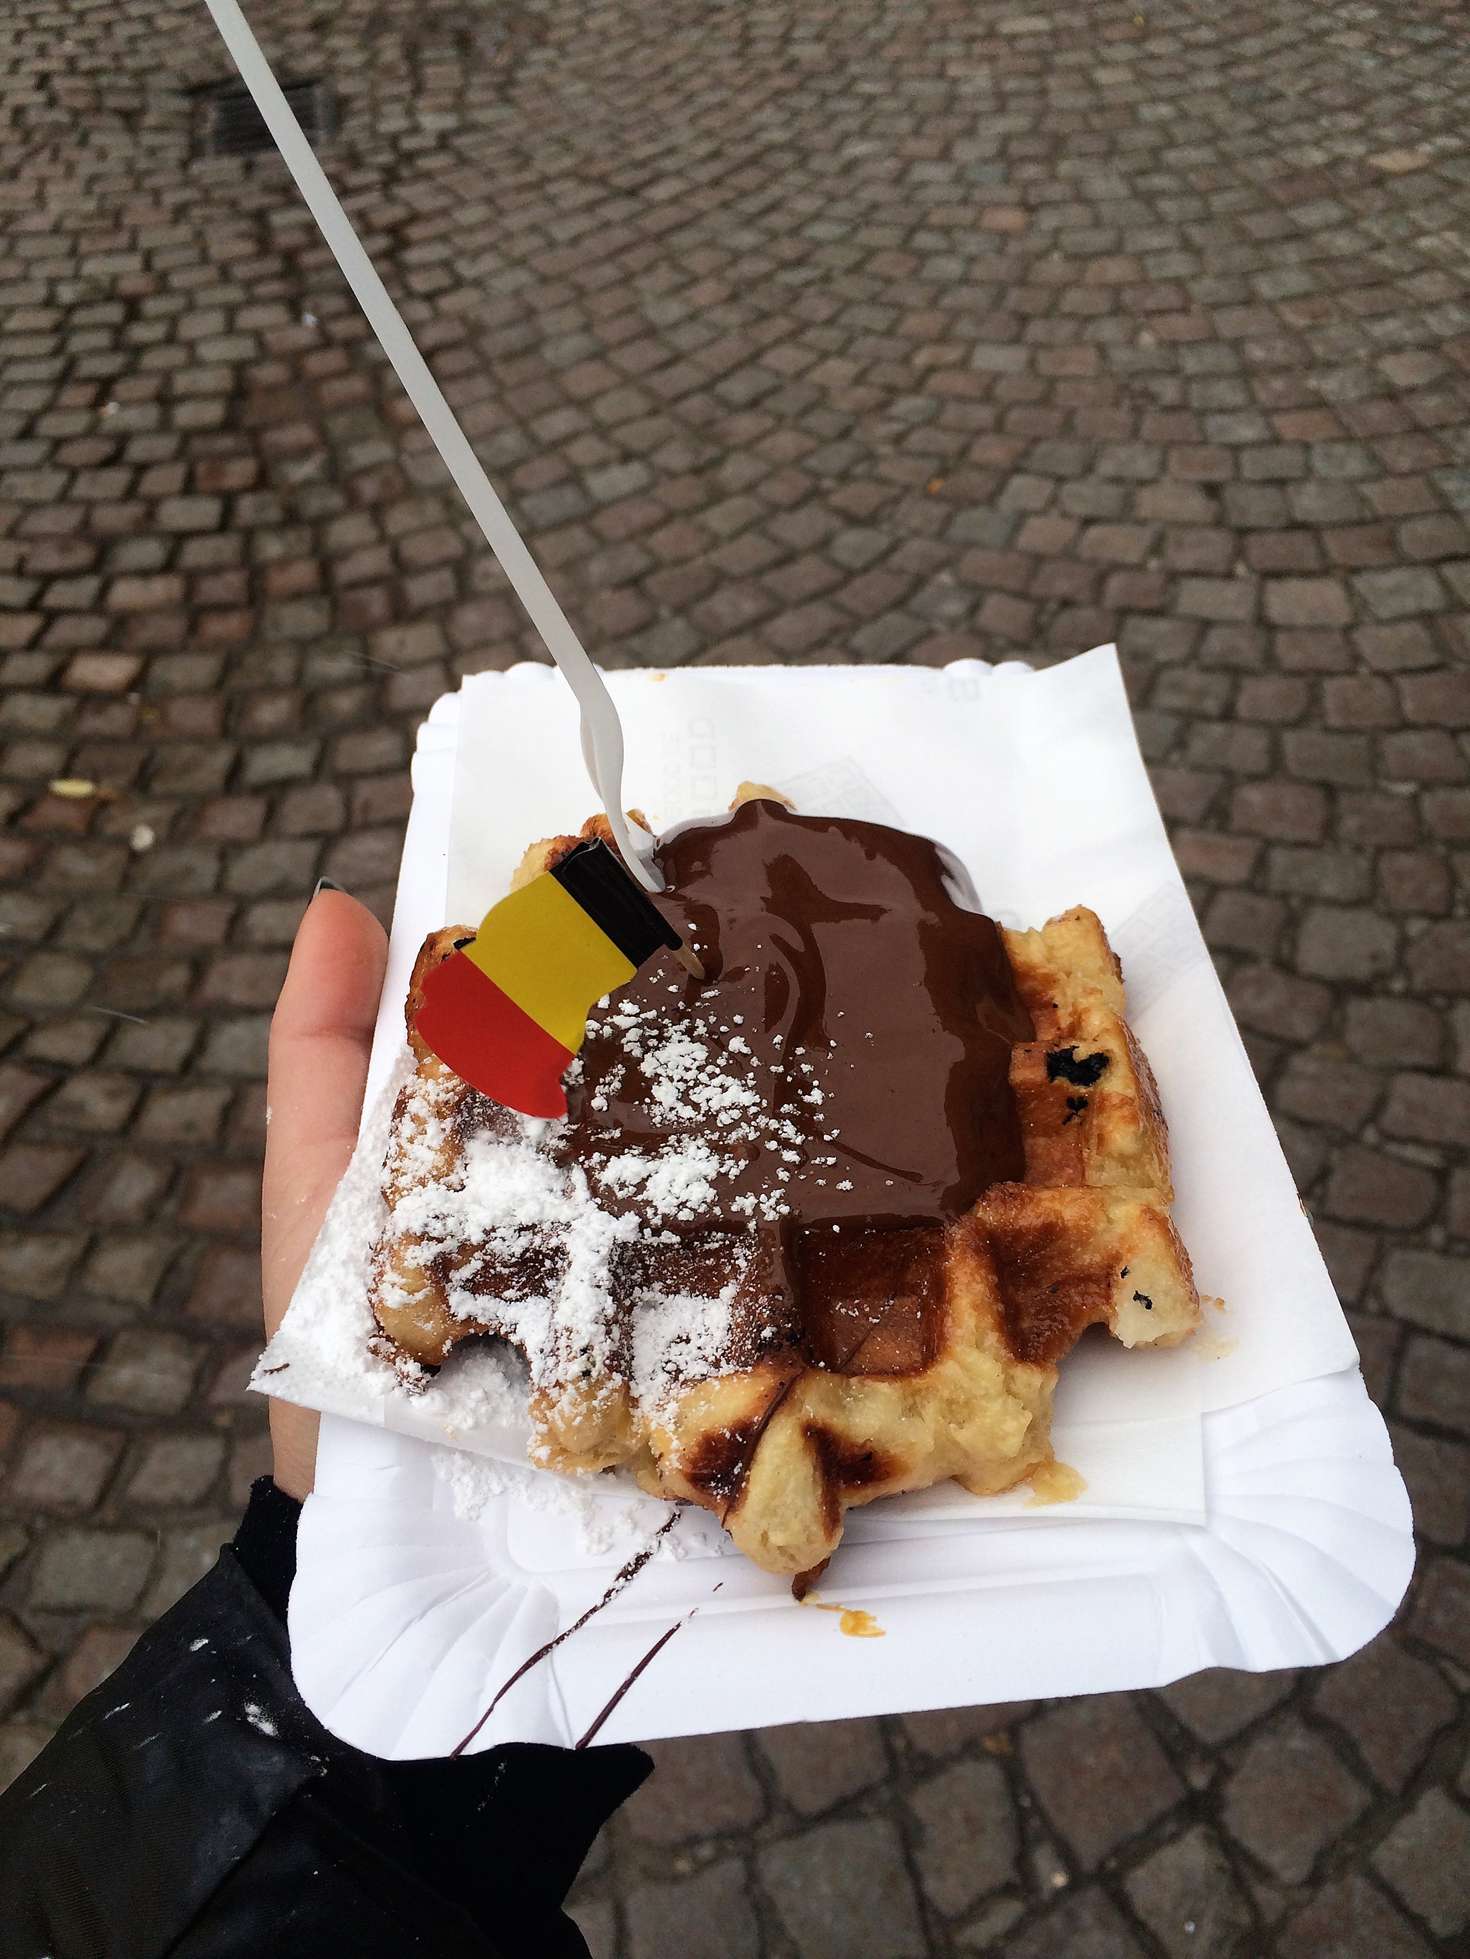 A picture of a liege waffle covered in nutella and topped with powdered sugar and a Belgian flag in Bruges, Belgium.